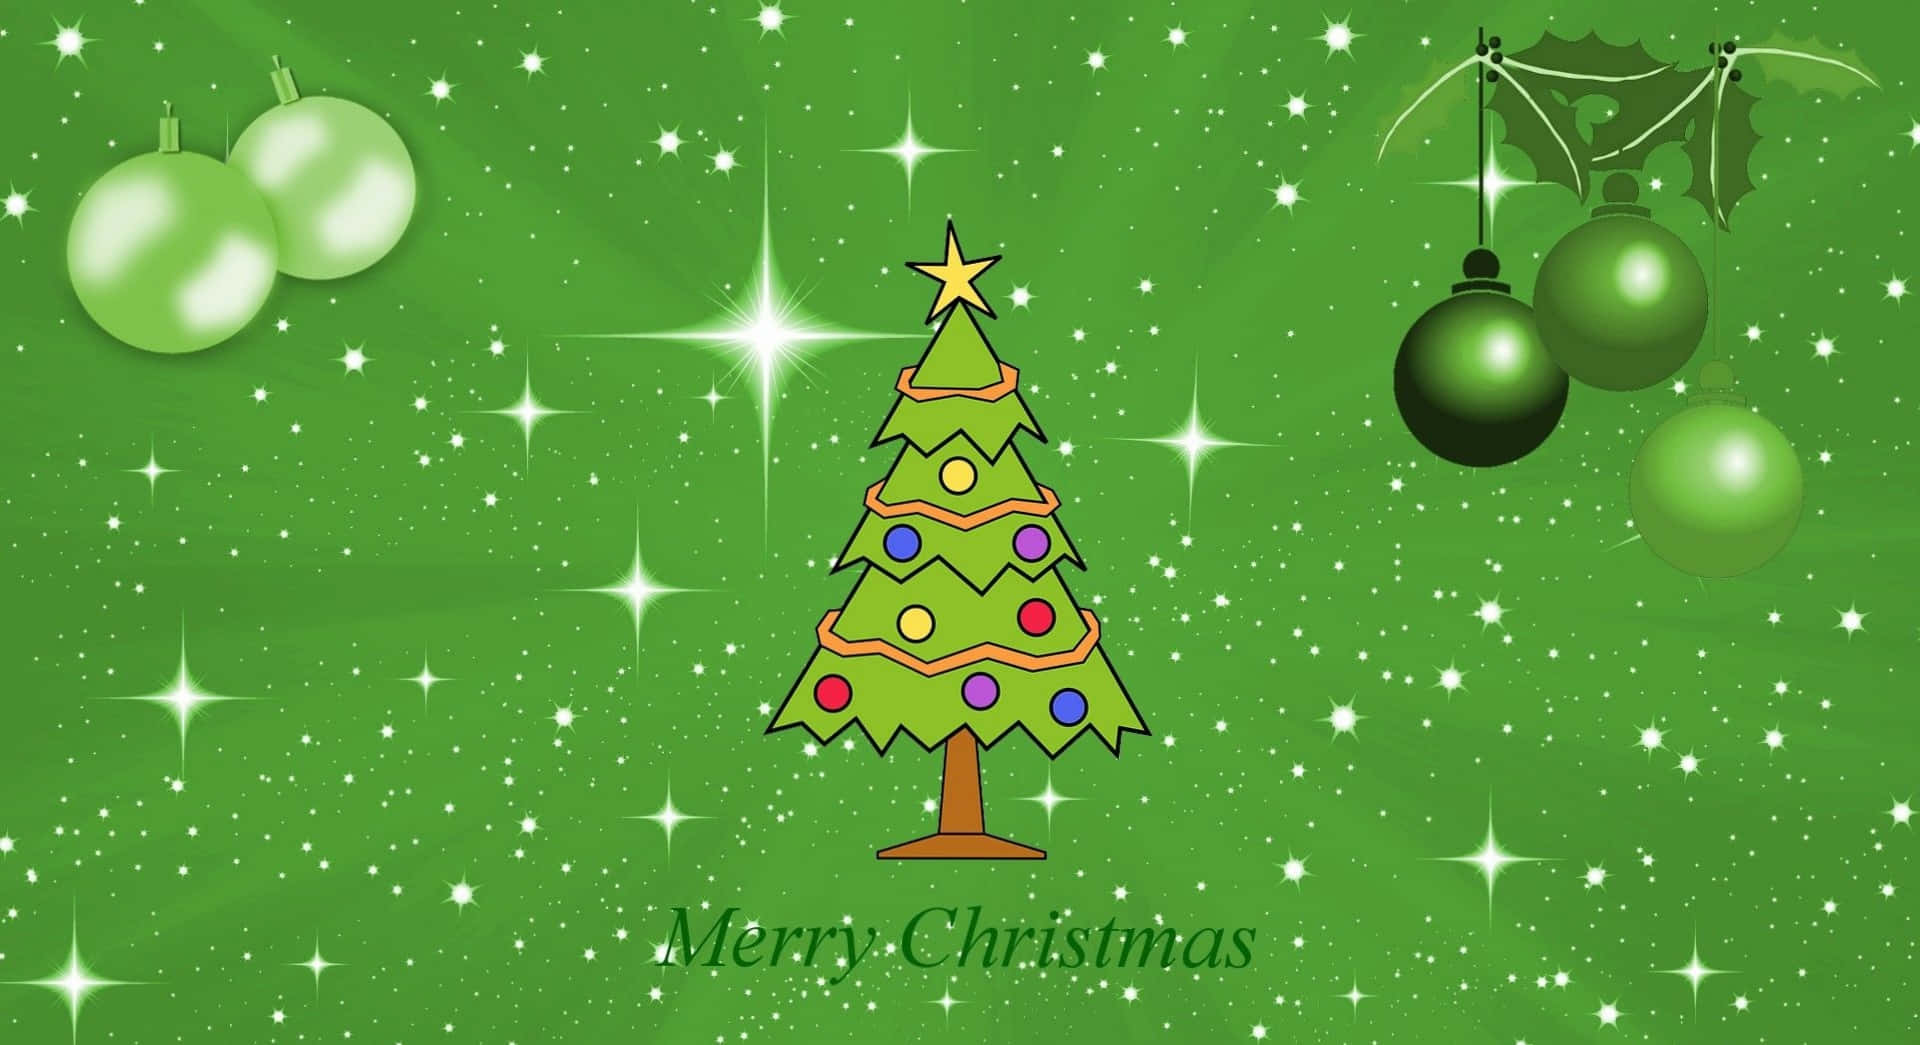 Have a festive, green holiday season with sustainable Christmas decorations Wallpaper